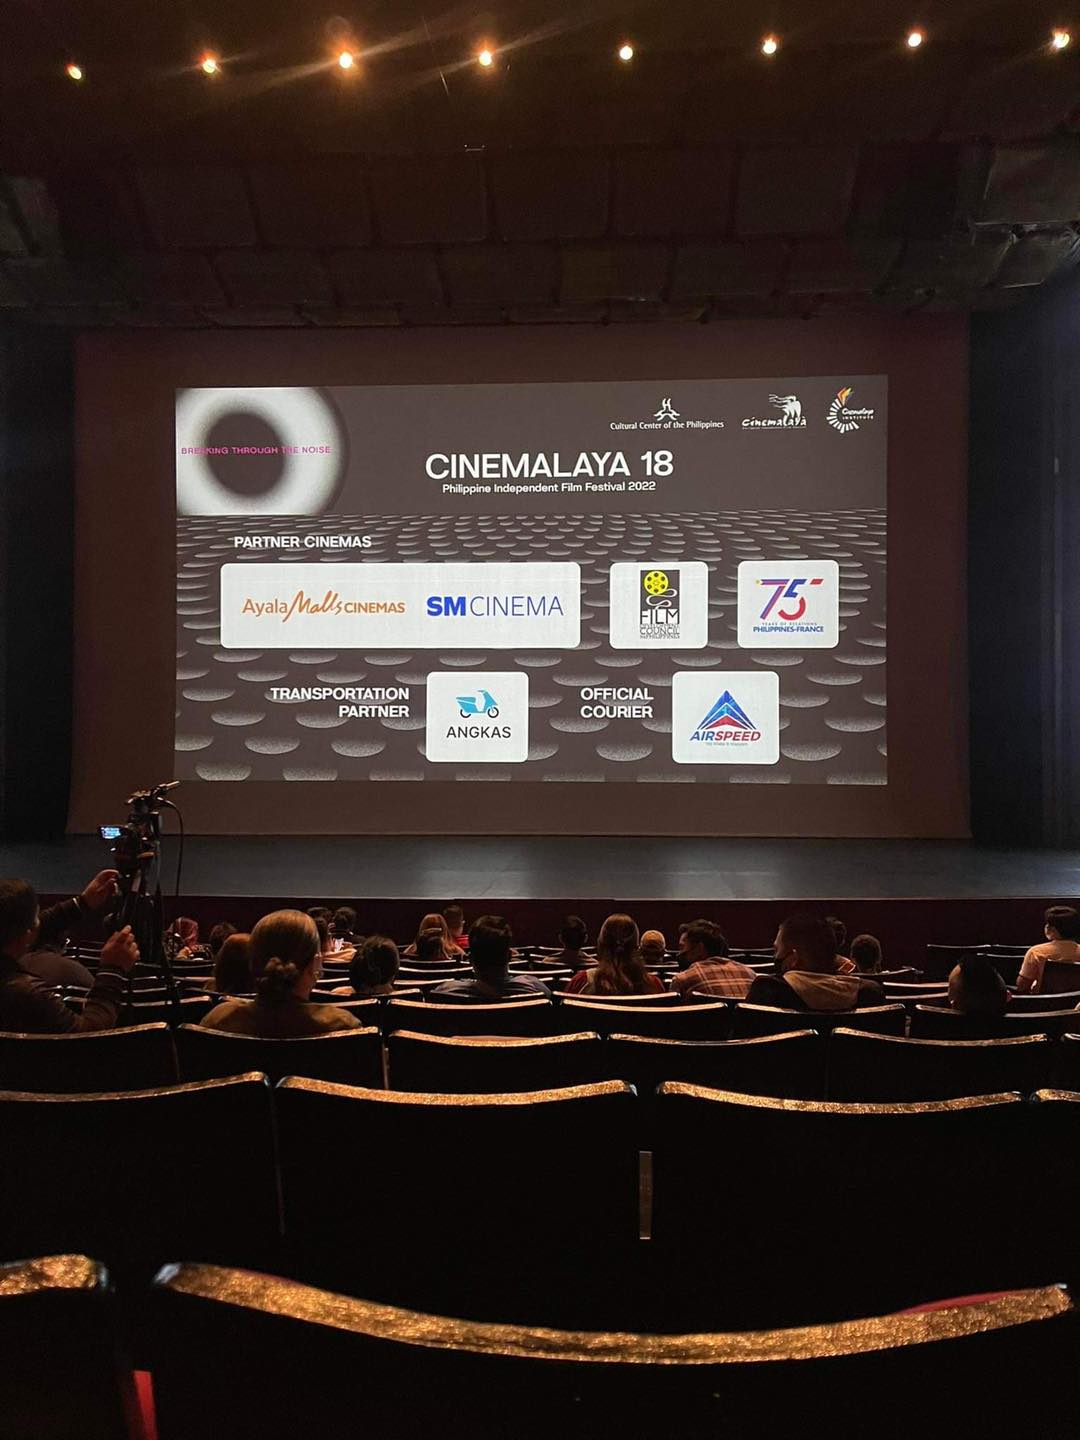 Cinemalaya 18 returned to Cultural Center of the Philippines